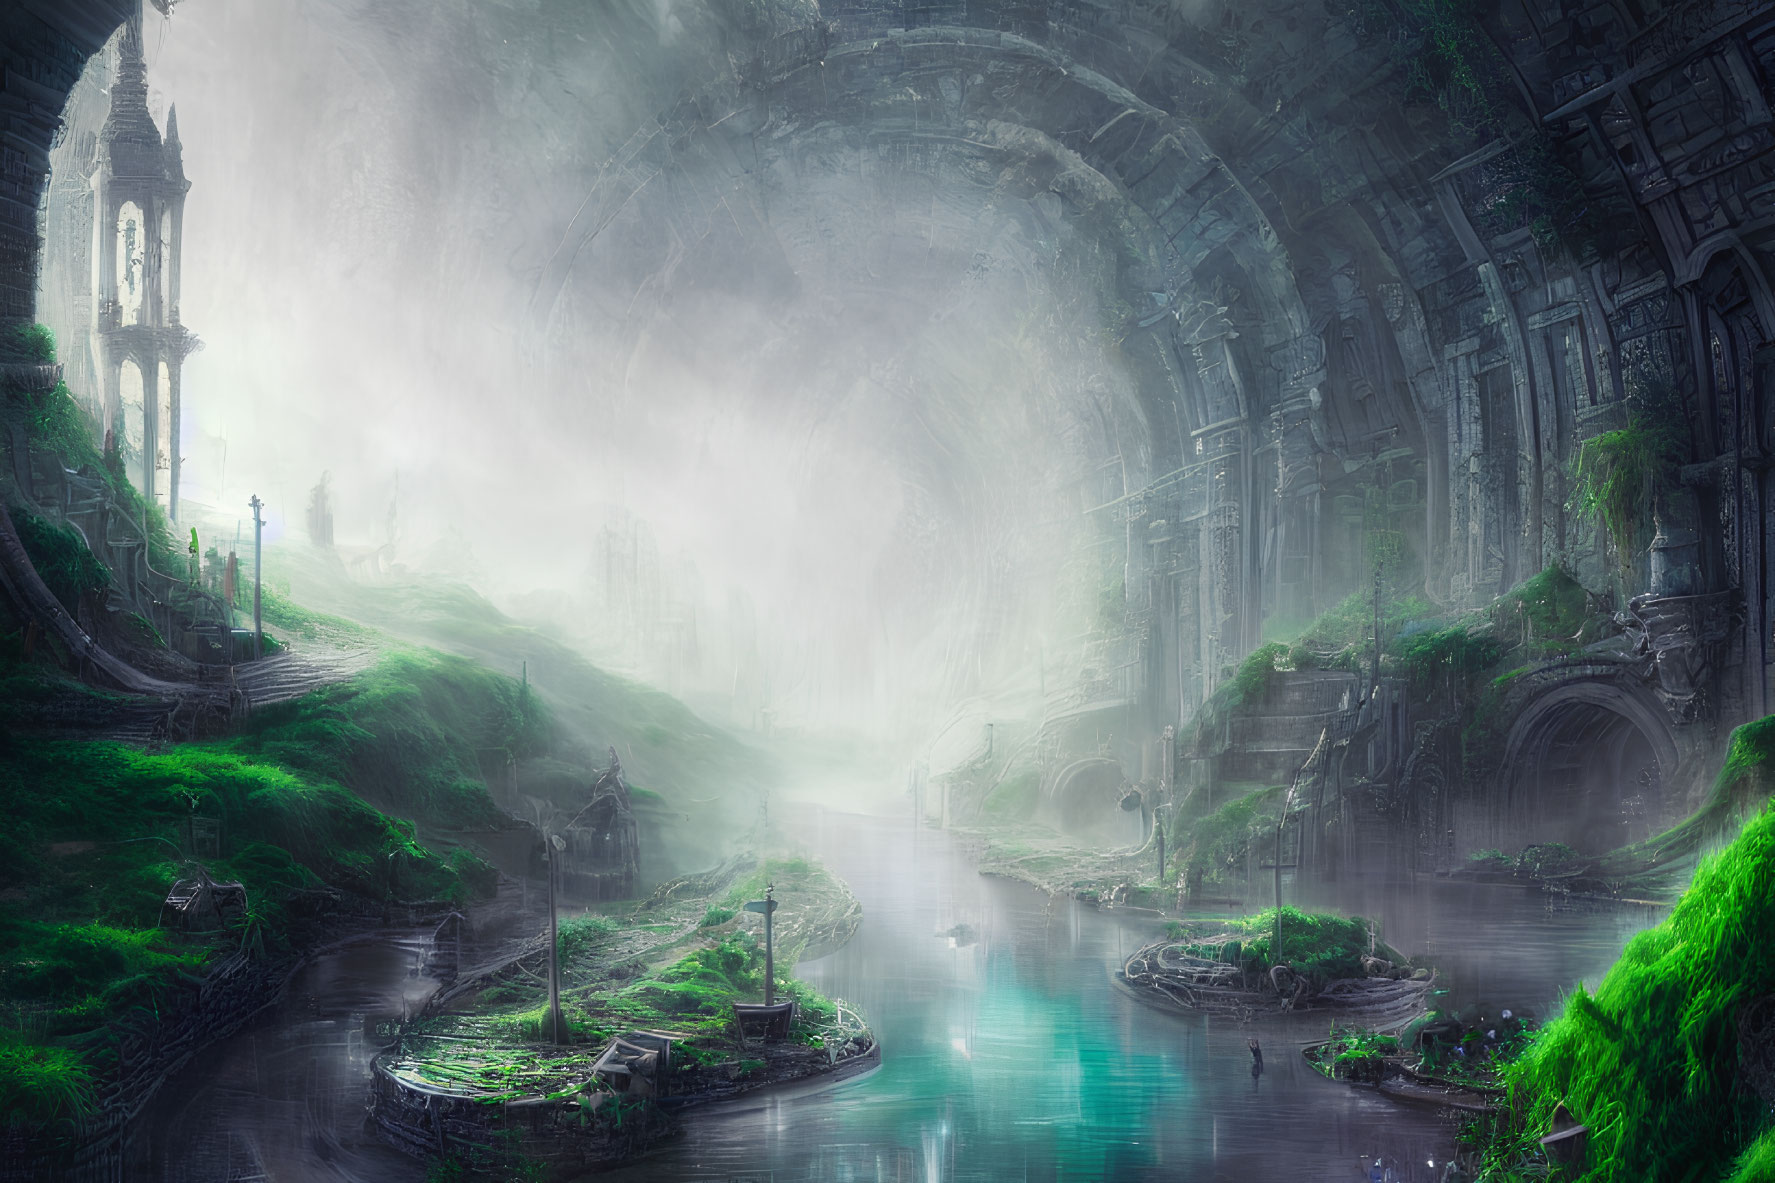 Ethereal fantasy landscape with ancient ruins, lush greenery, tranquil river, mystical fog, and